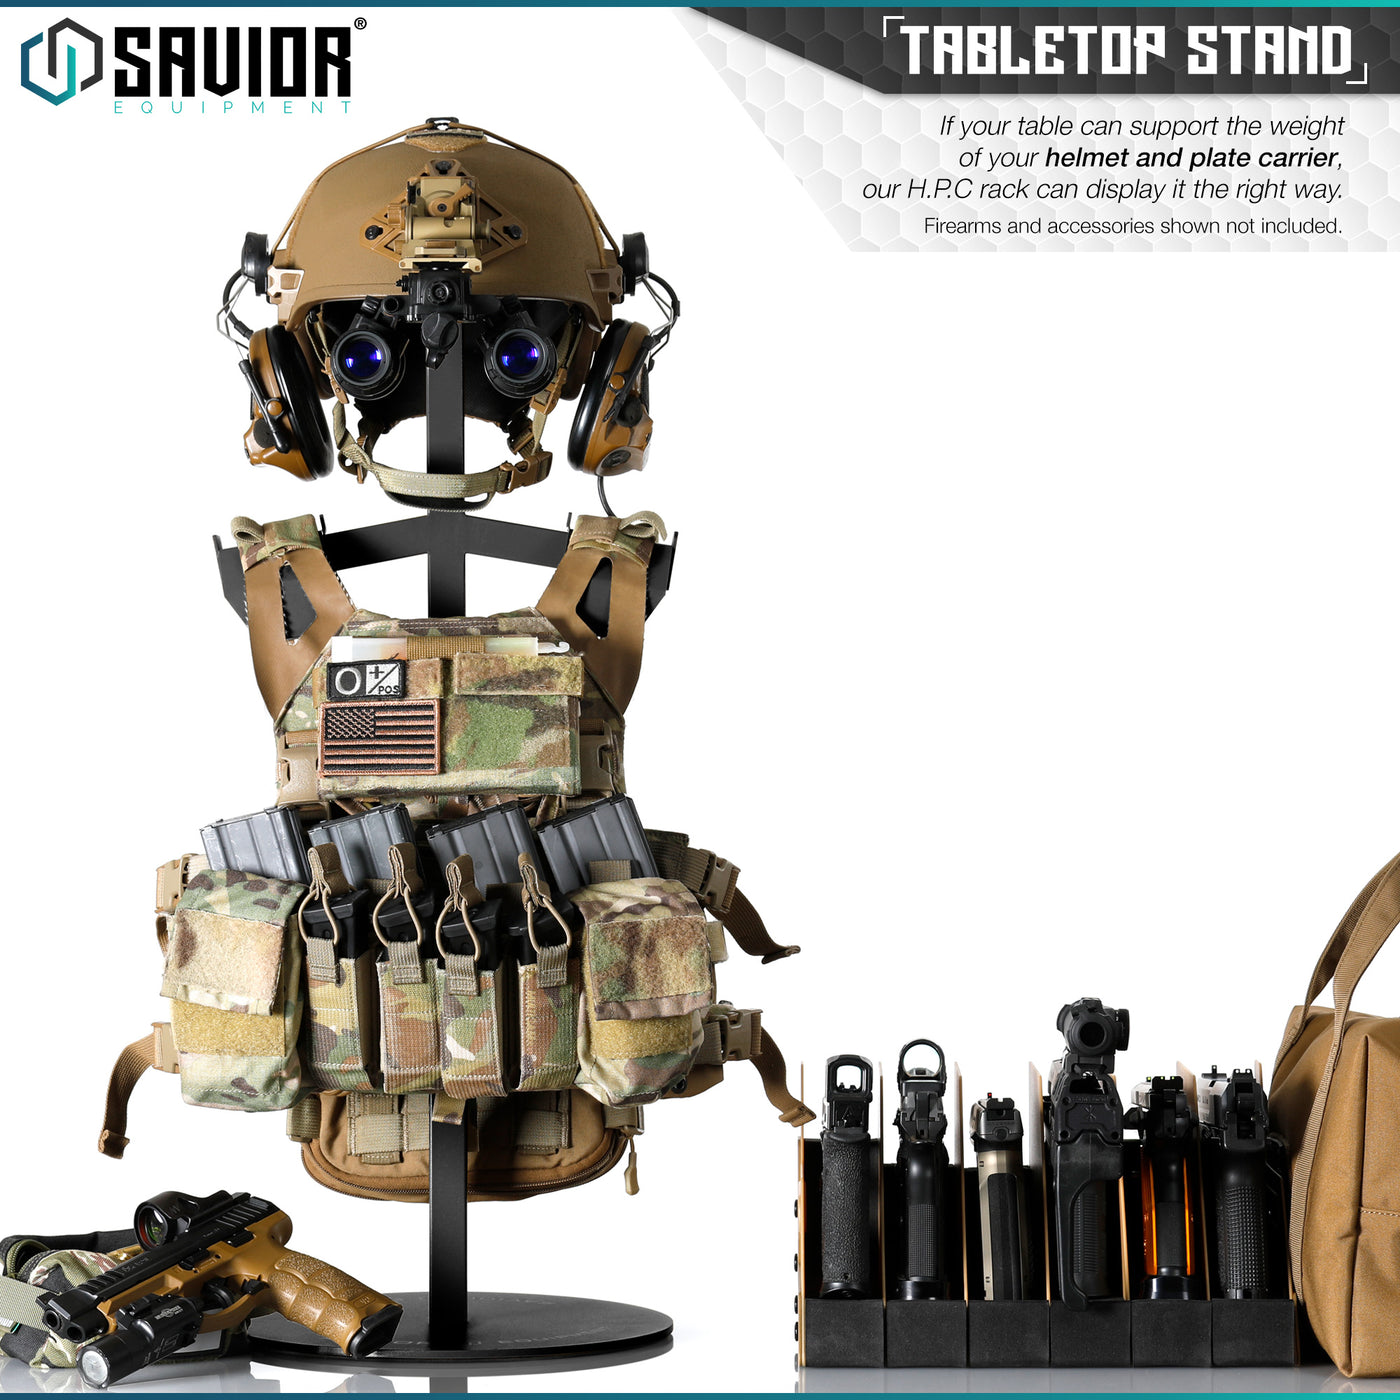 Tabletop Stand - If your table can support the weight of your helmet and plate carrier, our H.P.C rack can display it the right way.